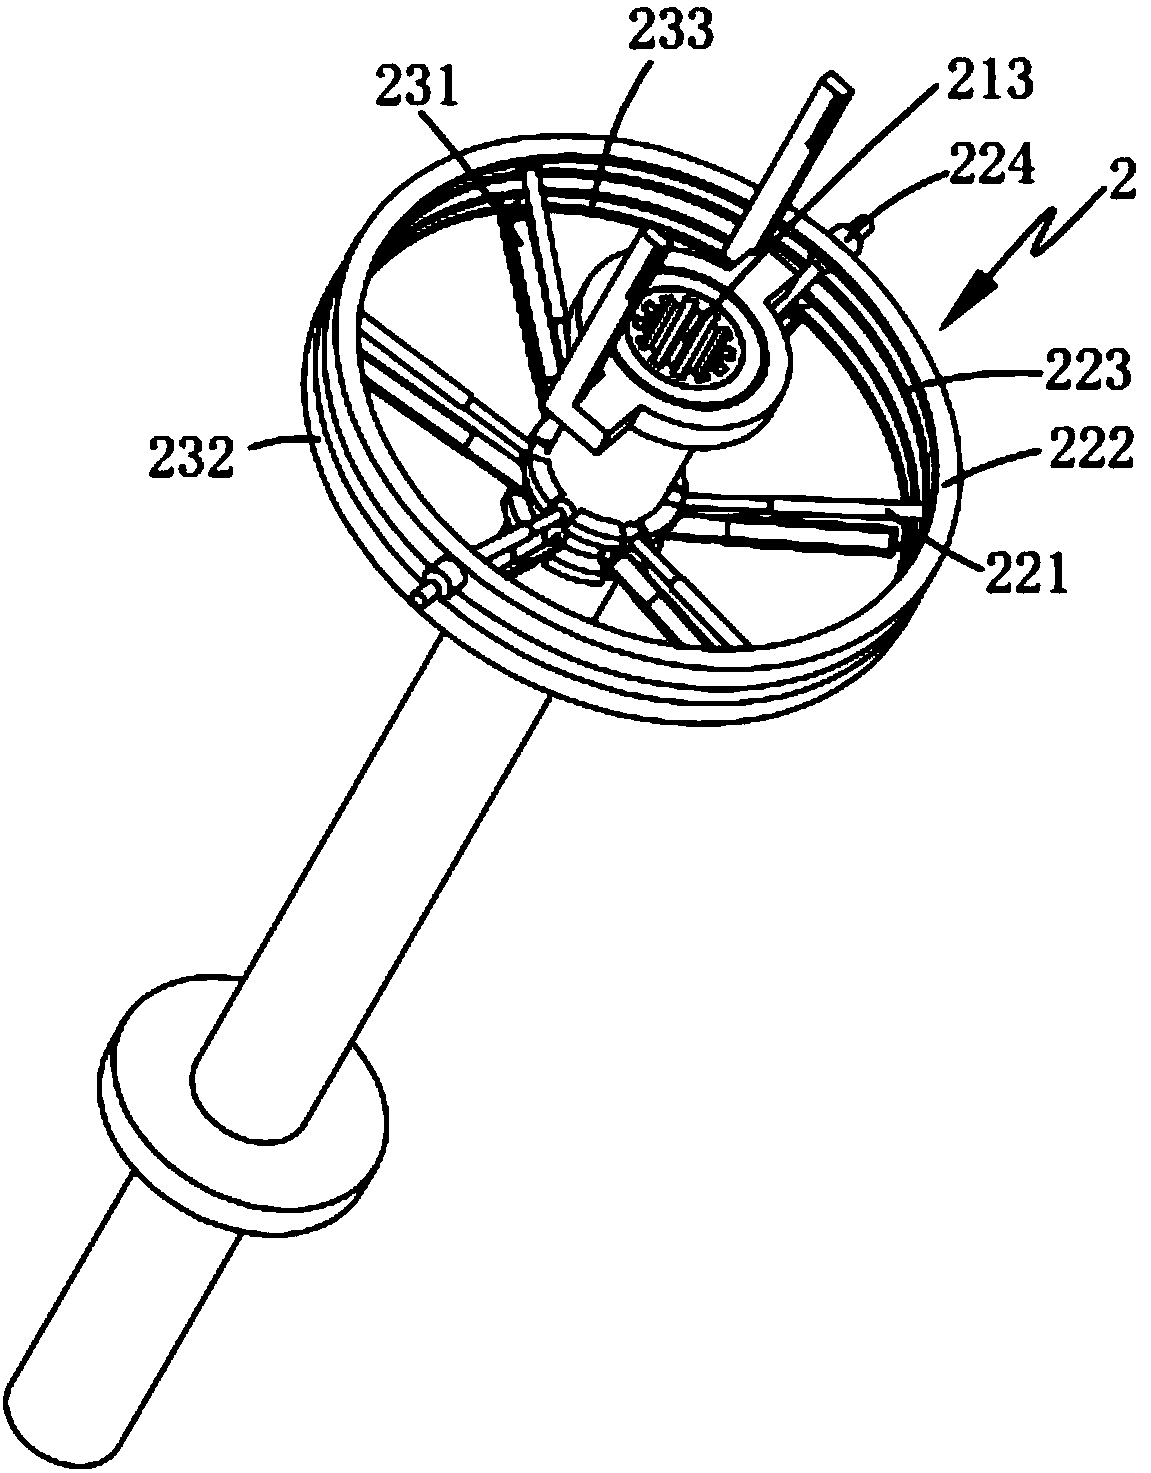 Automatic solid waste impurity electromagnetic screening device and method